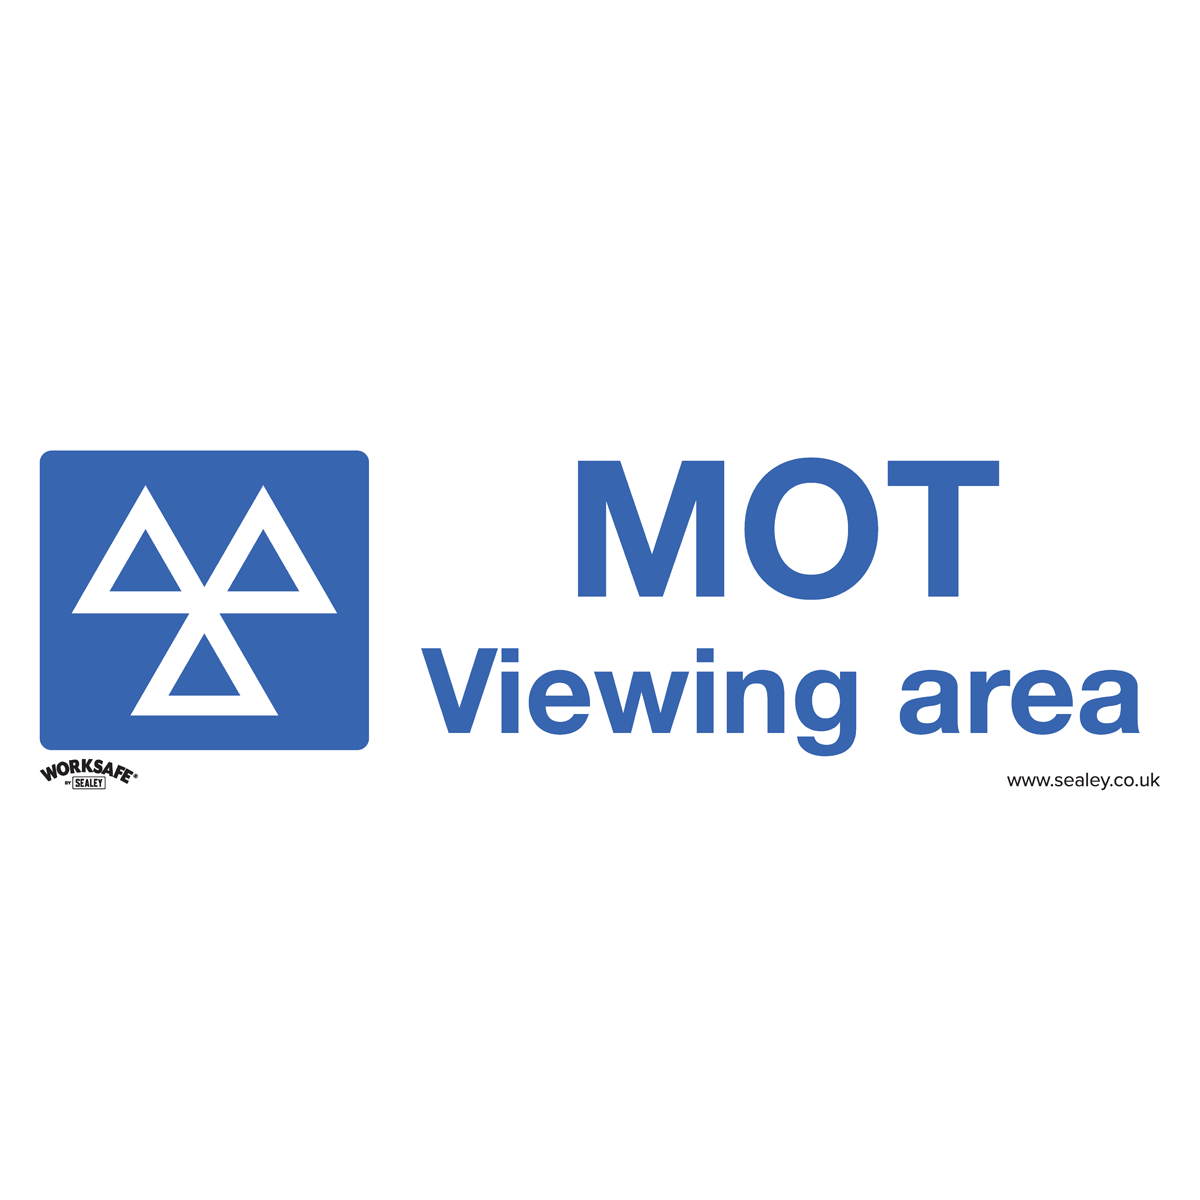 Warning Safety Sign - MOT Viewing Area - Self-Adhesive Vinyl - Pack of 10 - SS50V10 - Farming Parts